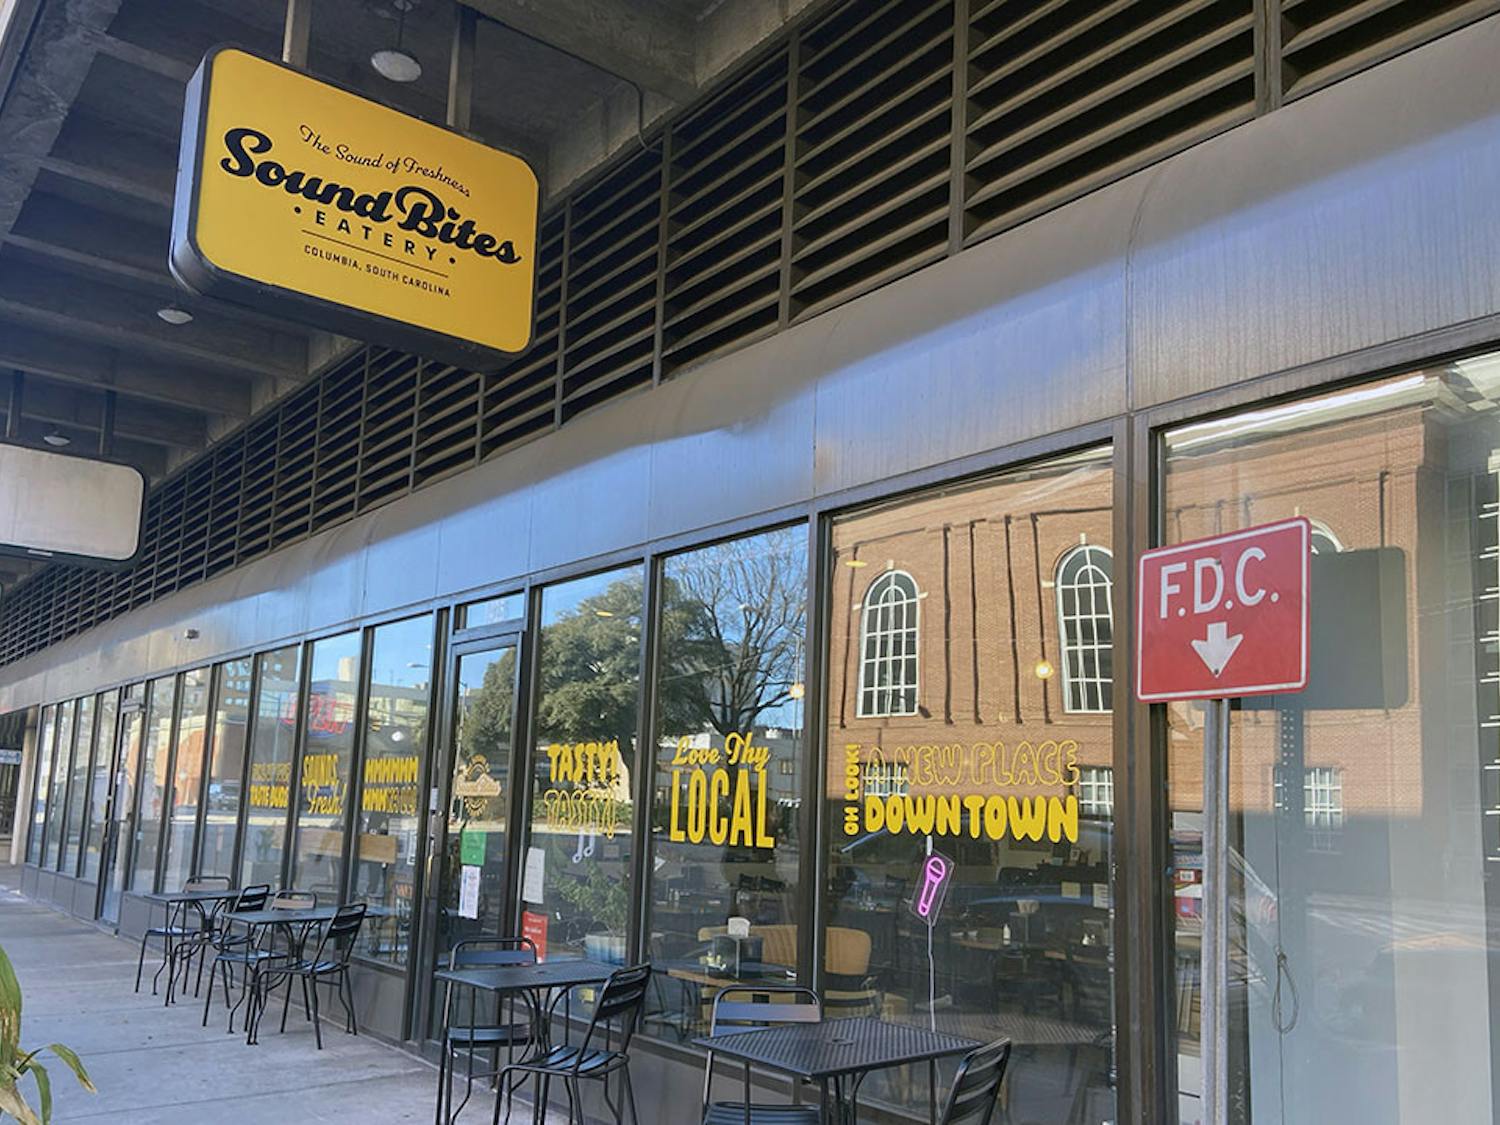 Sound Bites Eatery, located on Sumter Street, serves gourmet meals made with locally-grown ingredients. At a reasonable price, this healthy restaurant is great for college students.